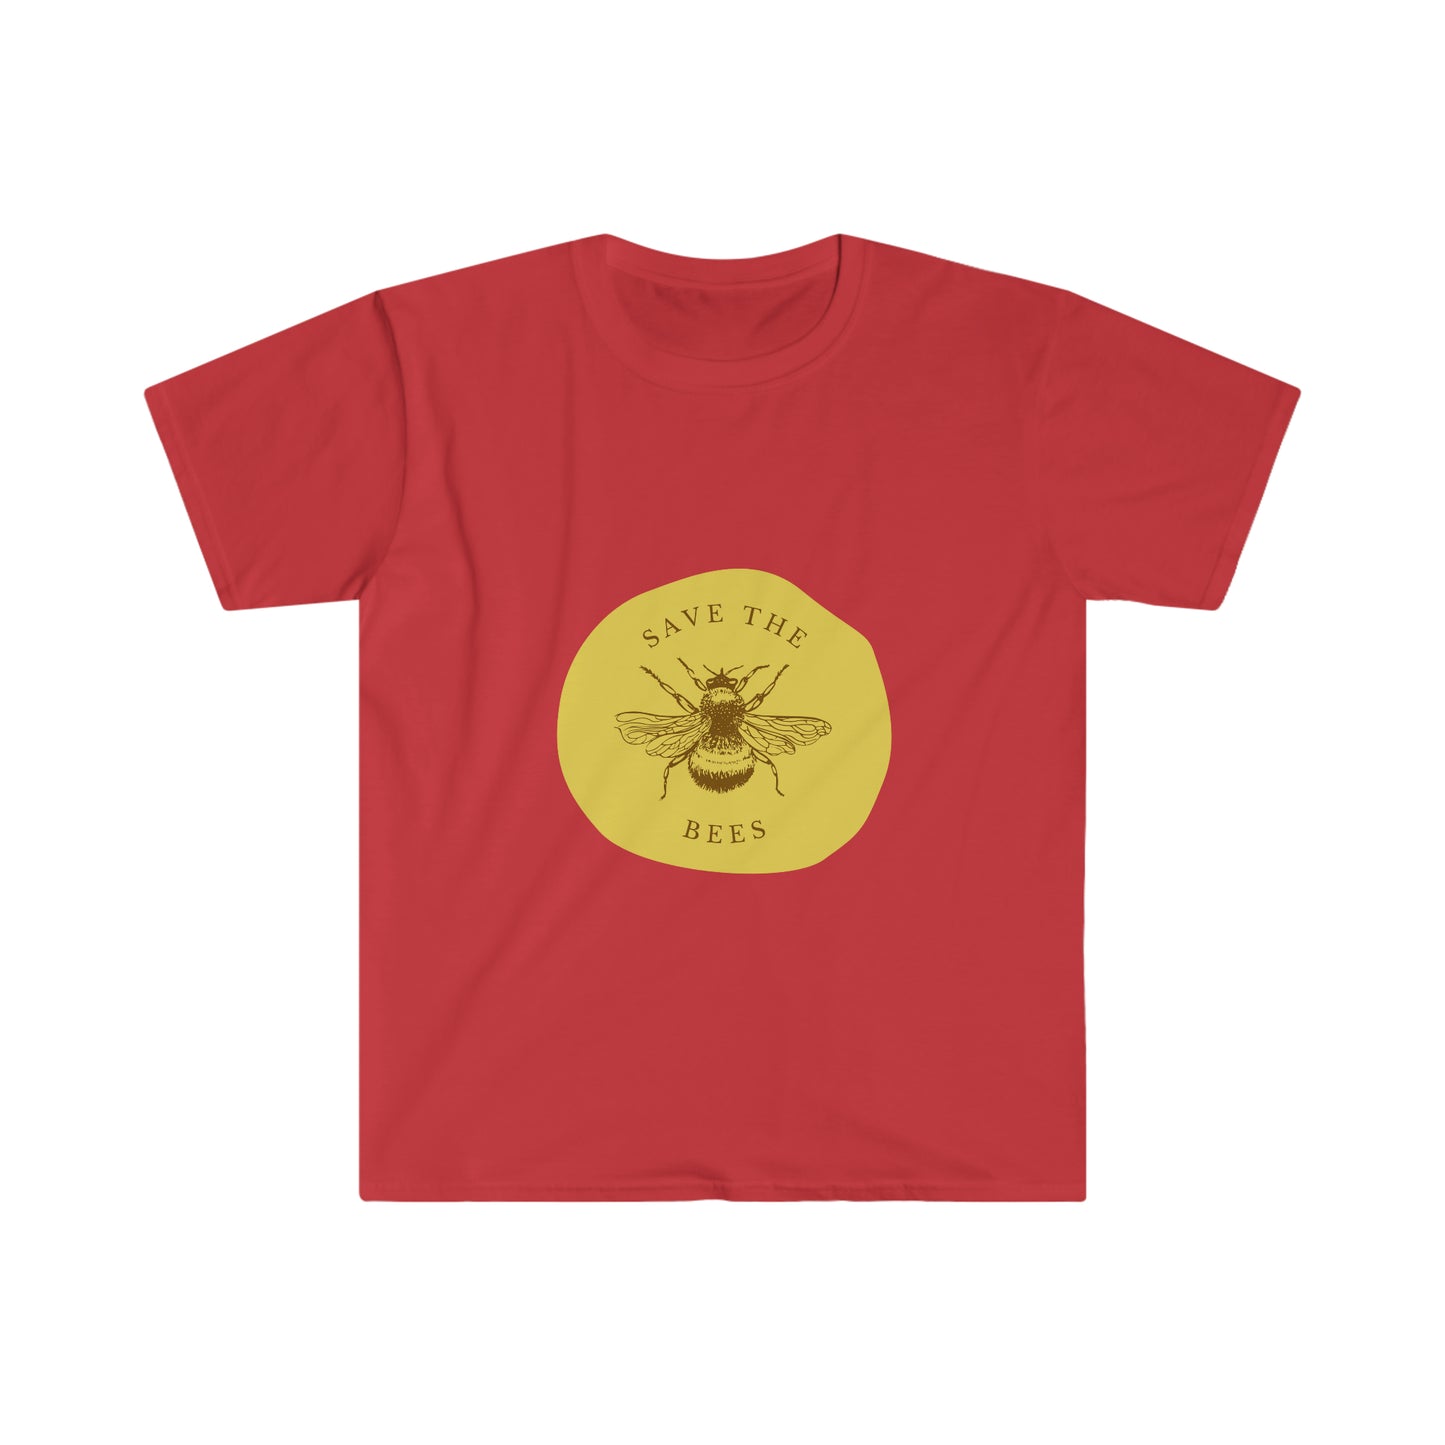 Save The Bees Unisex Softstyle T-Shirt